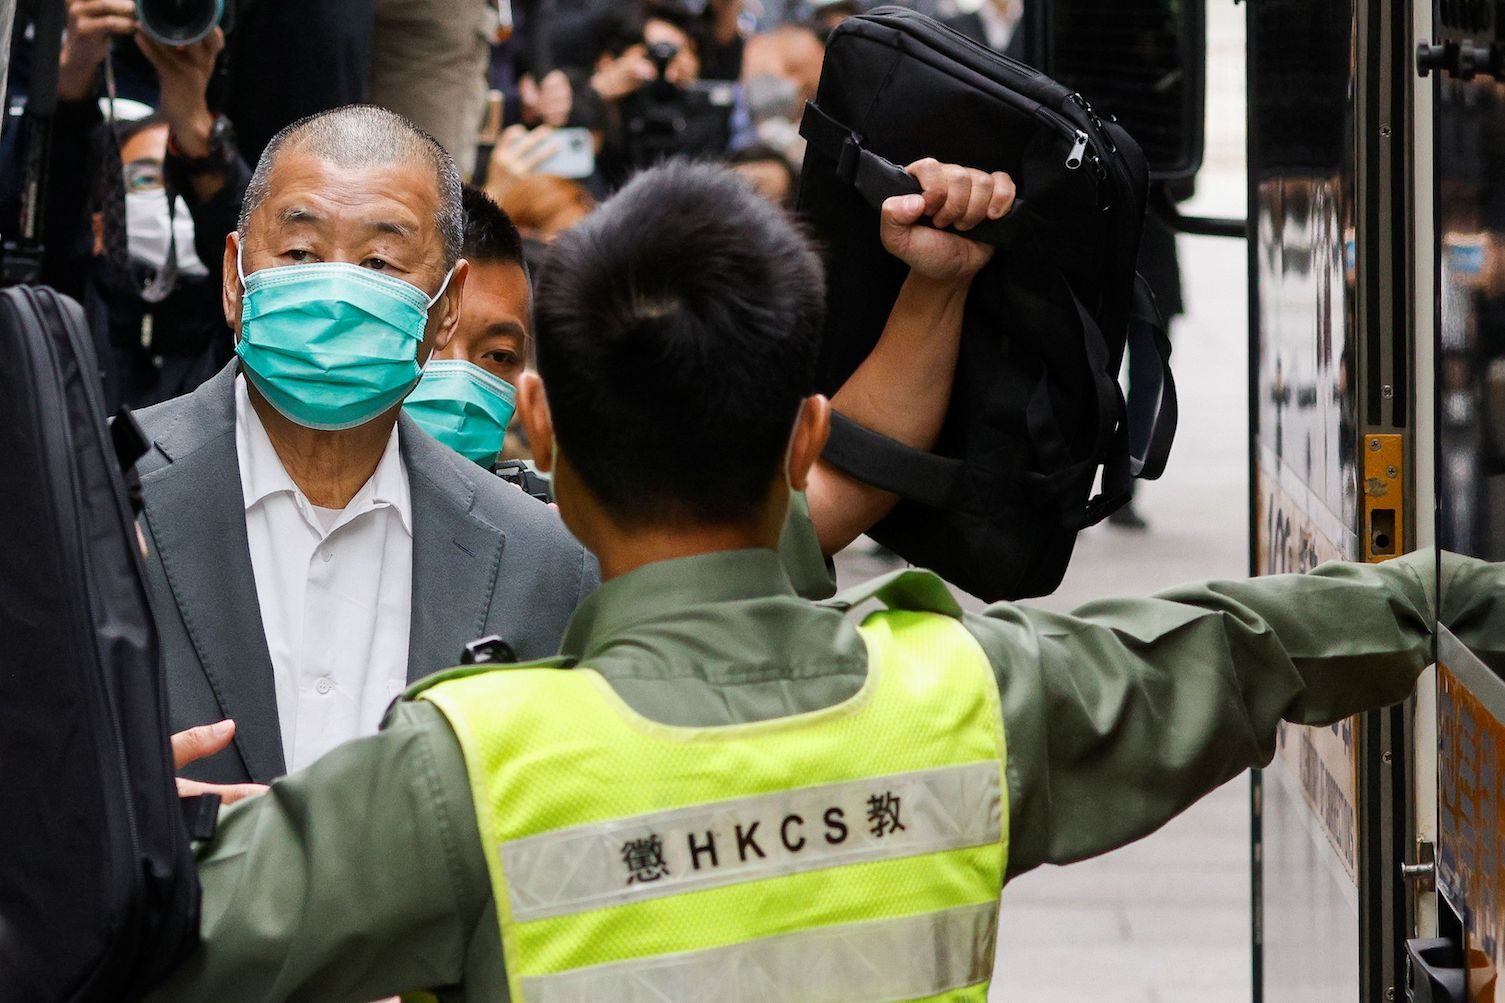 Hong Kong freezes listed shares of media tycoon Lai under security law